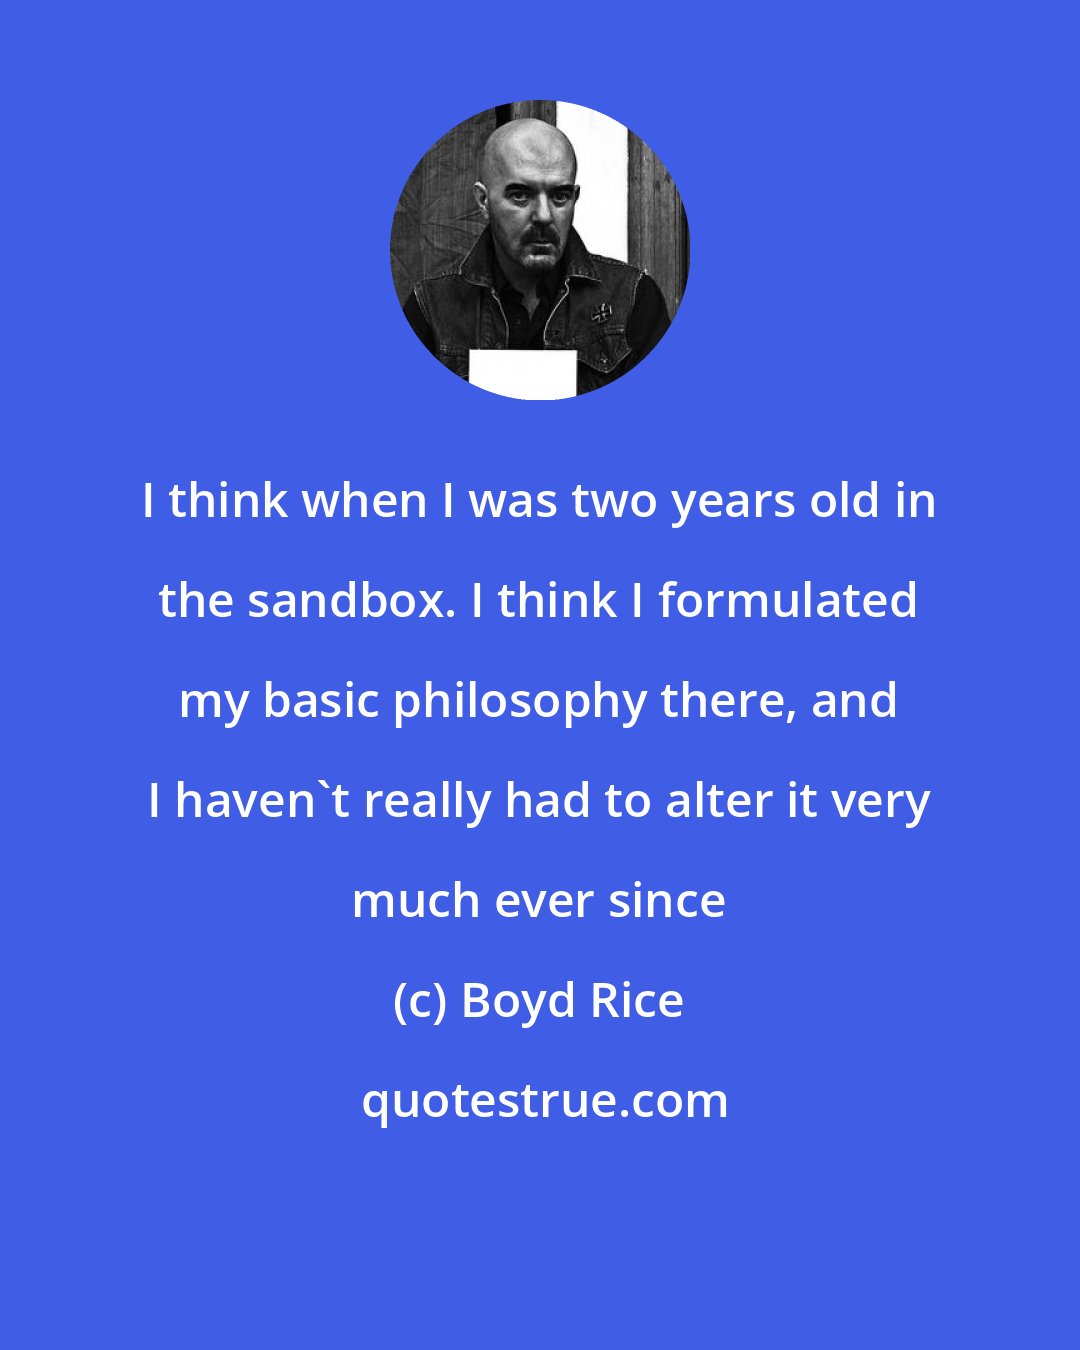 Boyd Rice: I think when I was two years old in the sandbox. I think I formulated my basic philosophy there, and I haven't really had to alter it very much ever since